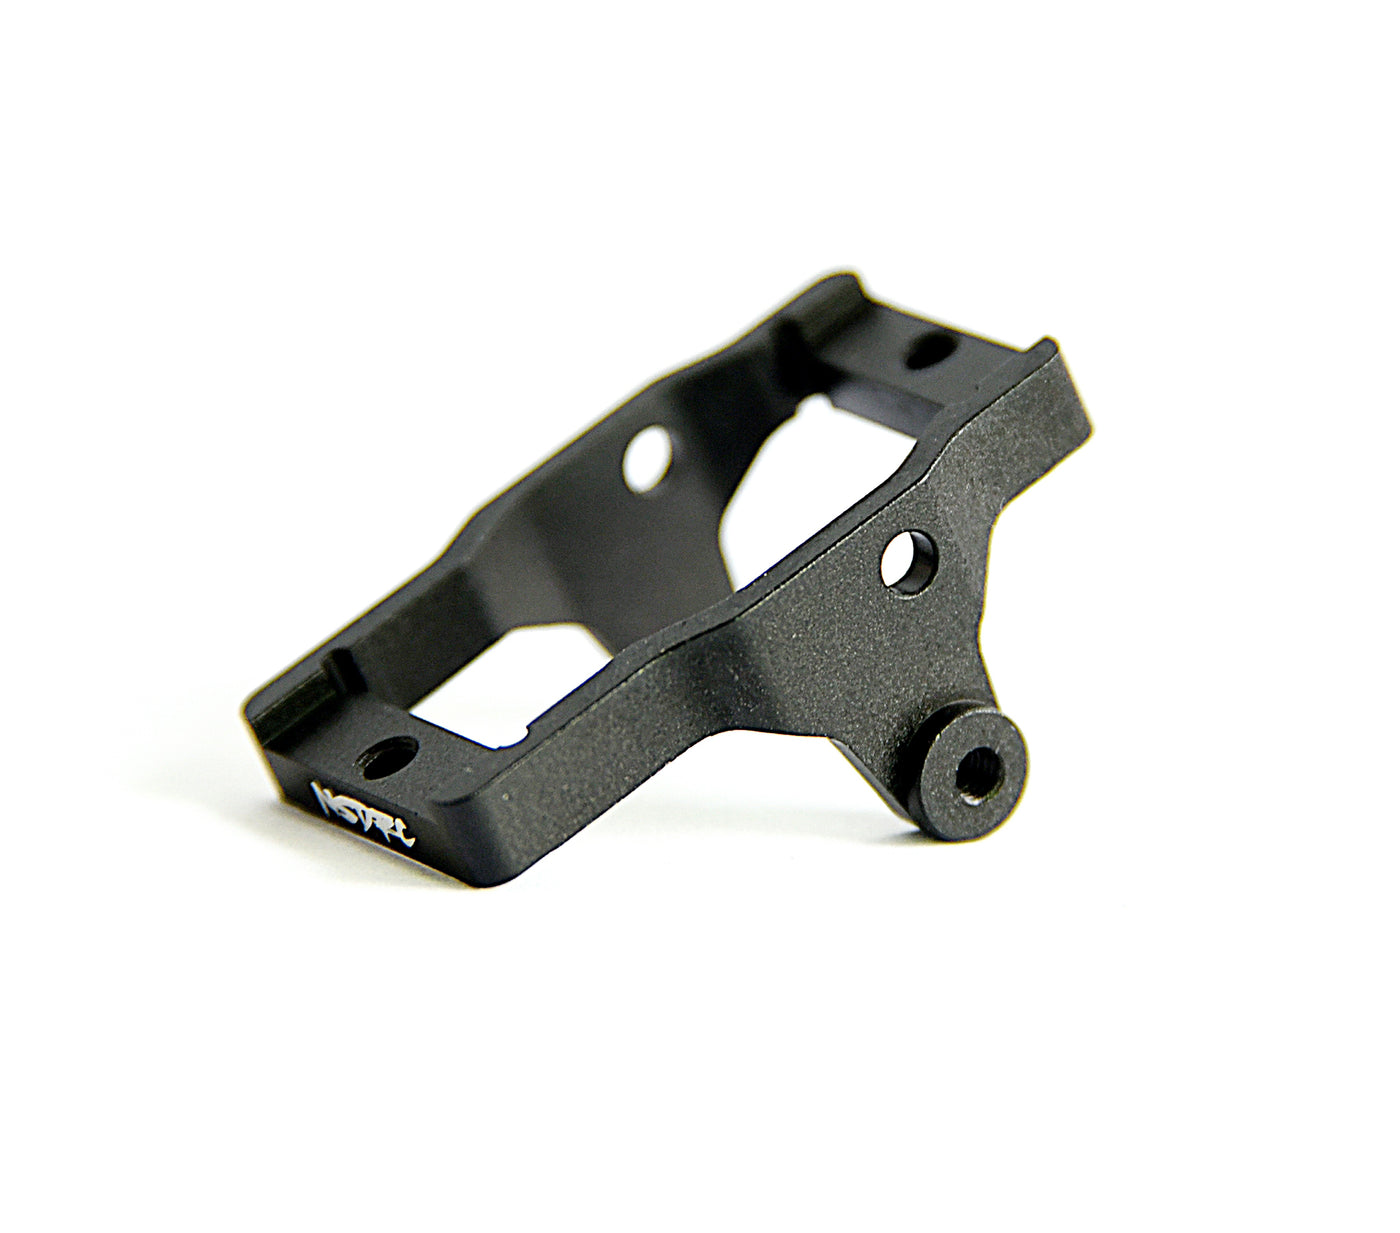 Nsdrc Aluminum Mount and Horn For the TRX4M